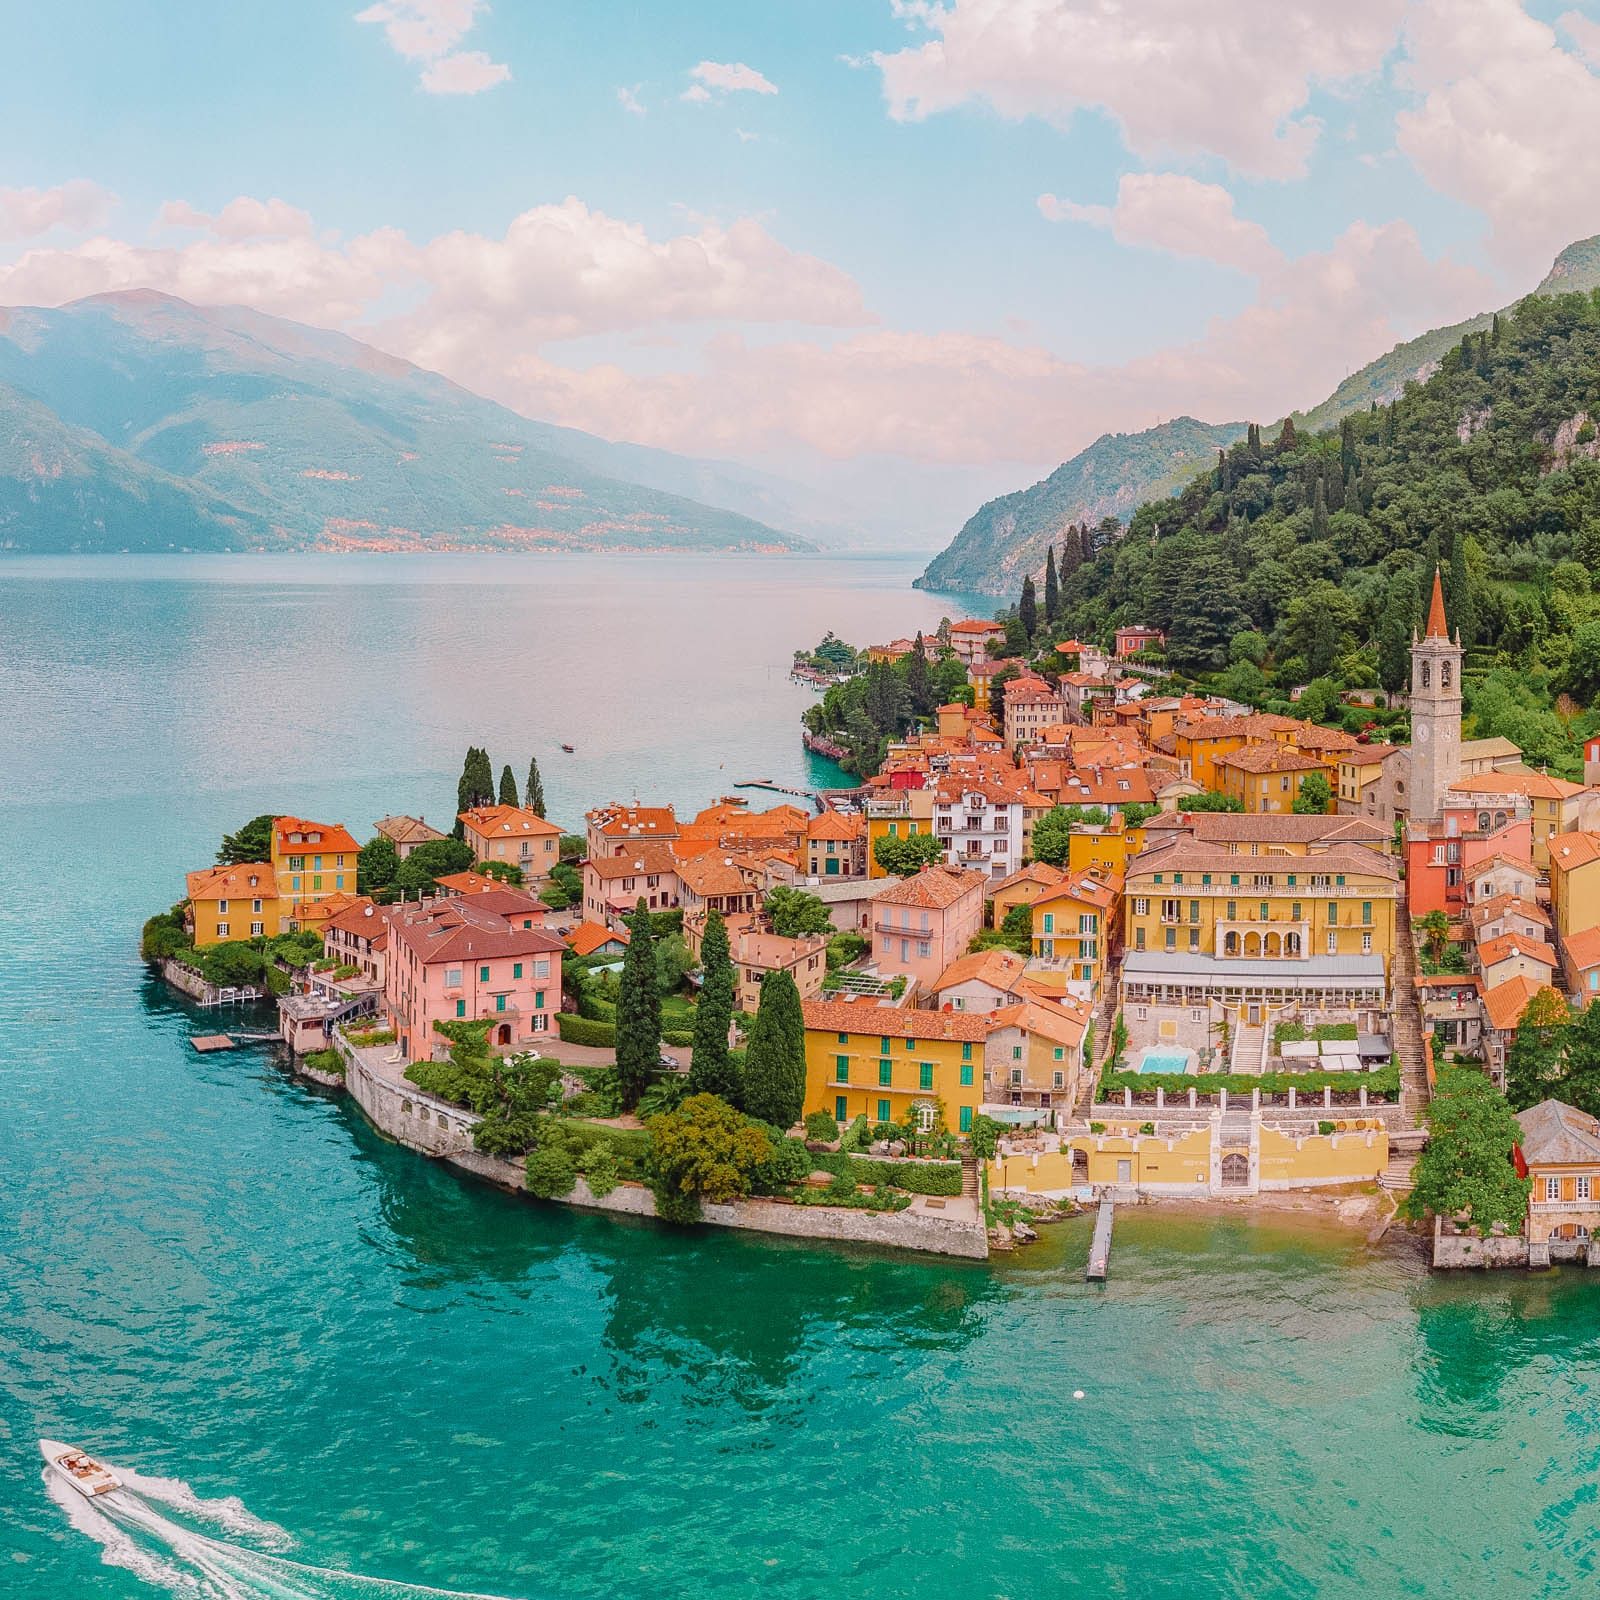 Landscape of Lake Como in Italy, popular destination for private aircraft charter